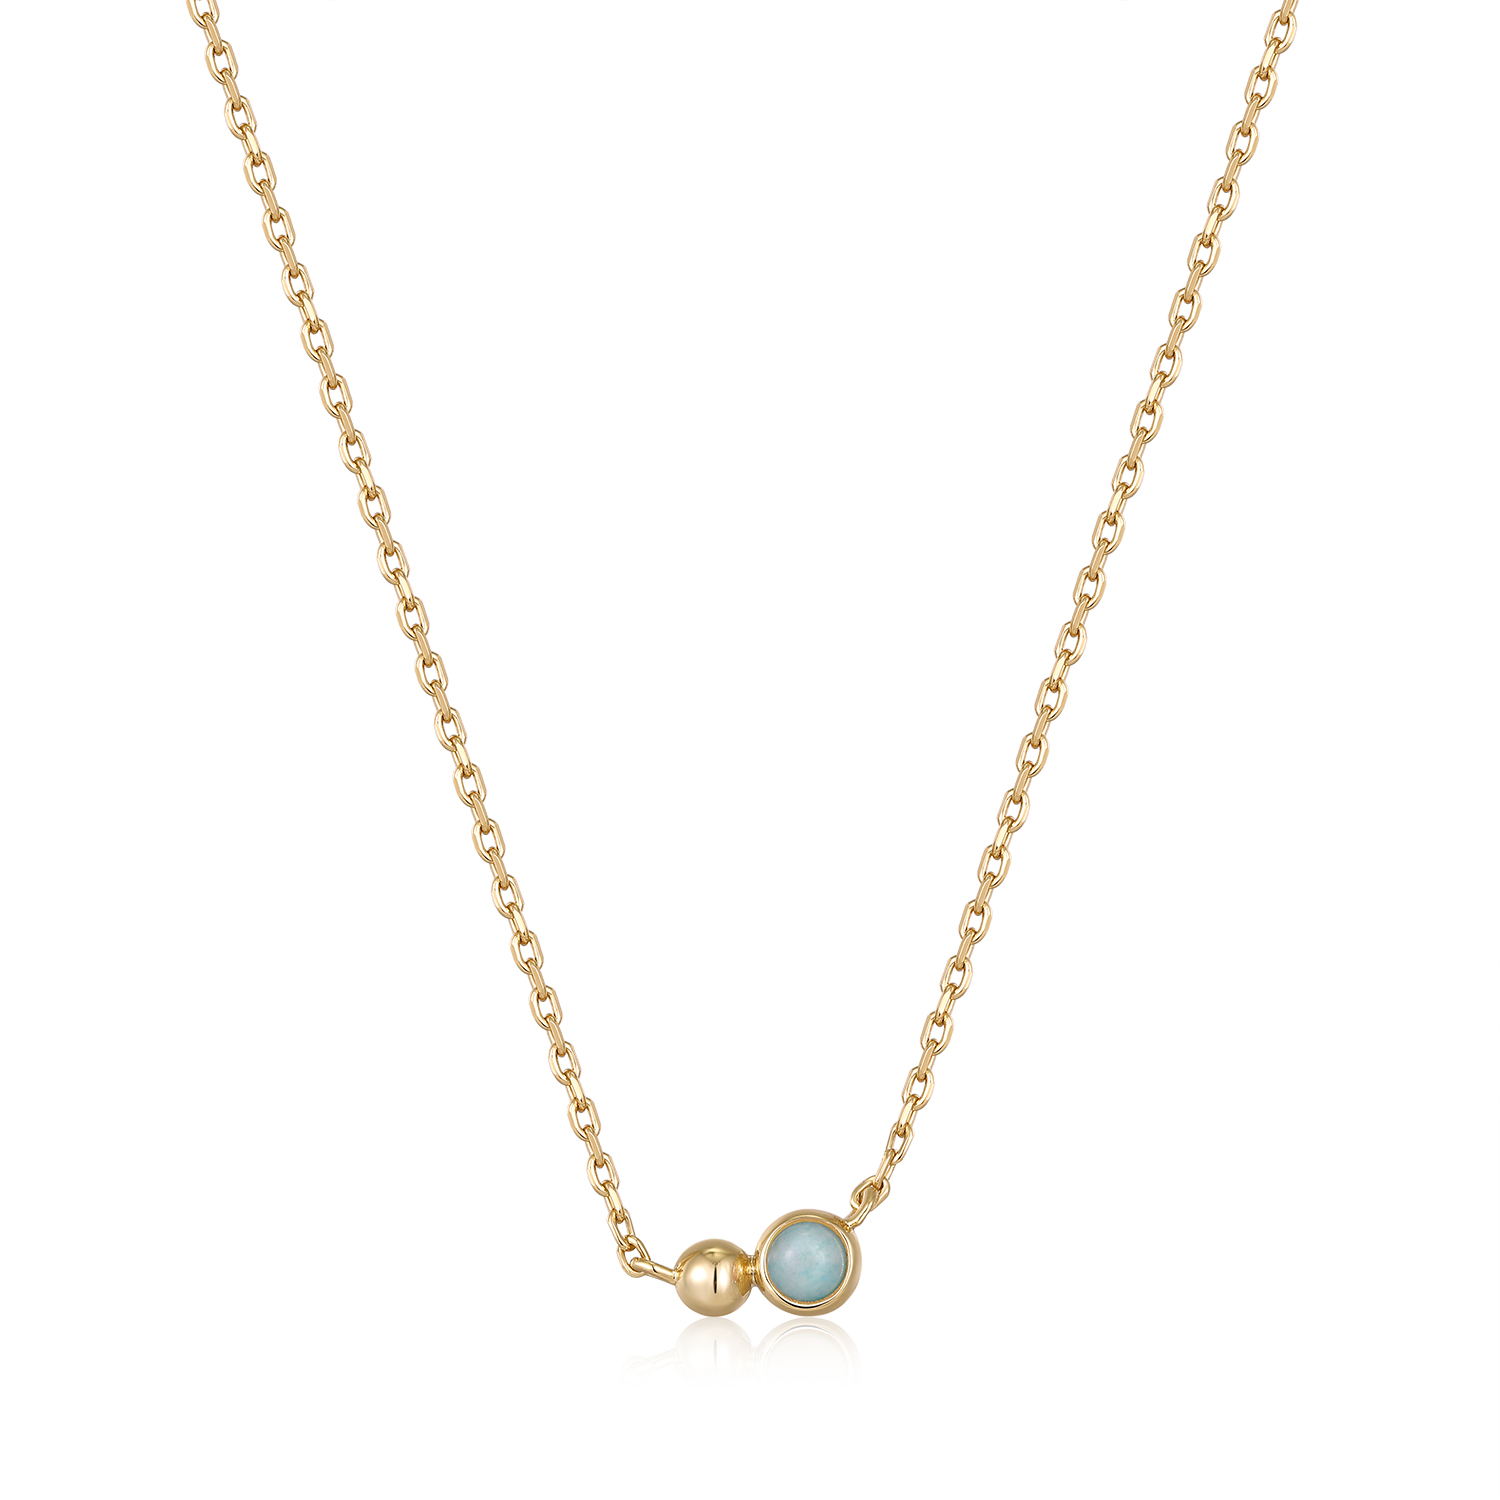 ANIA HAIE Orb Amazonite Pendant Necklace, Gold-plate